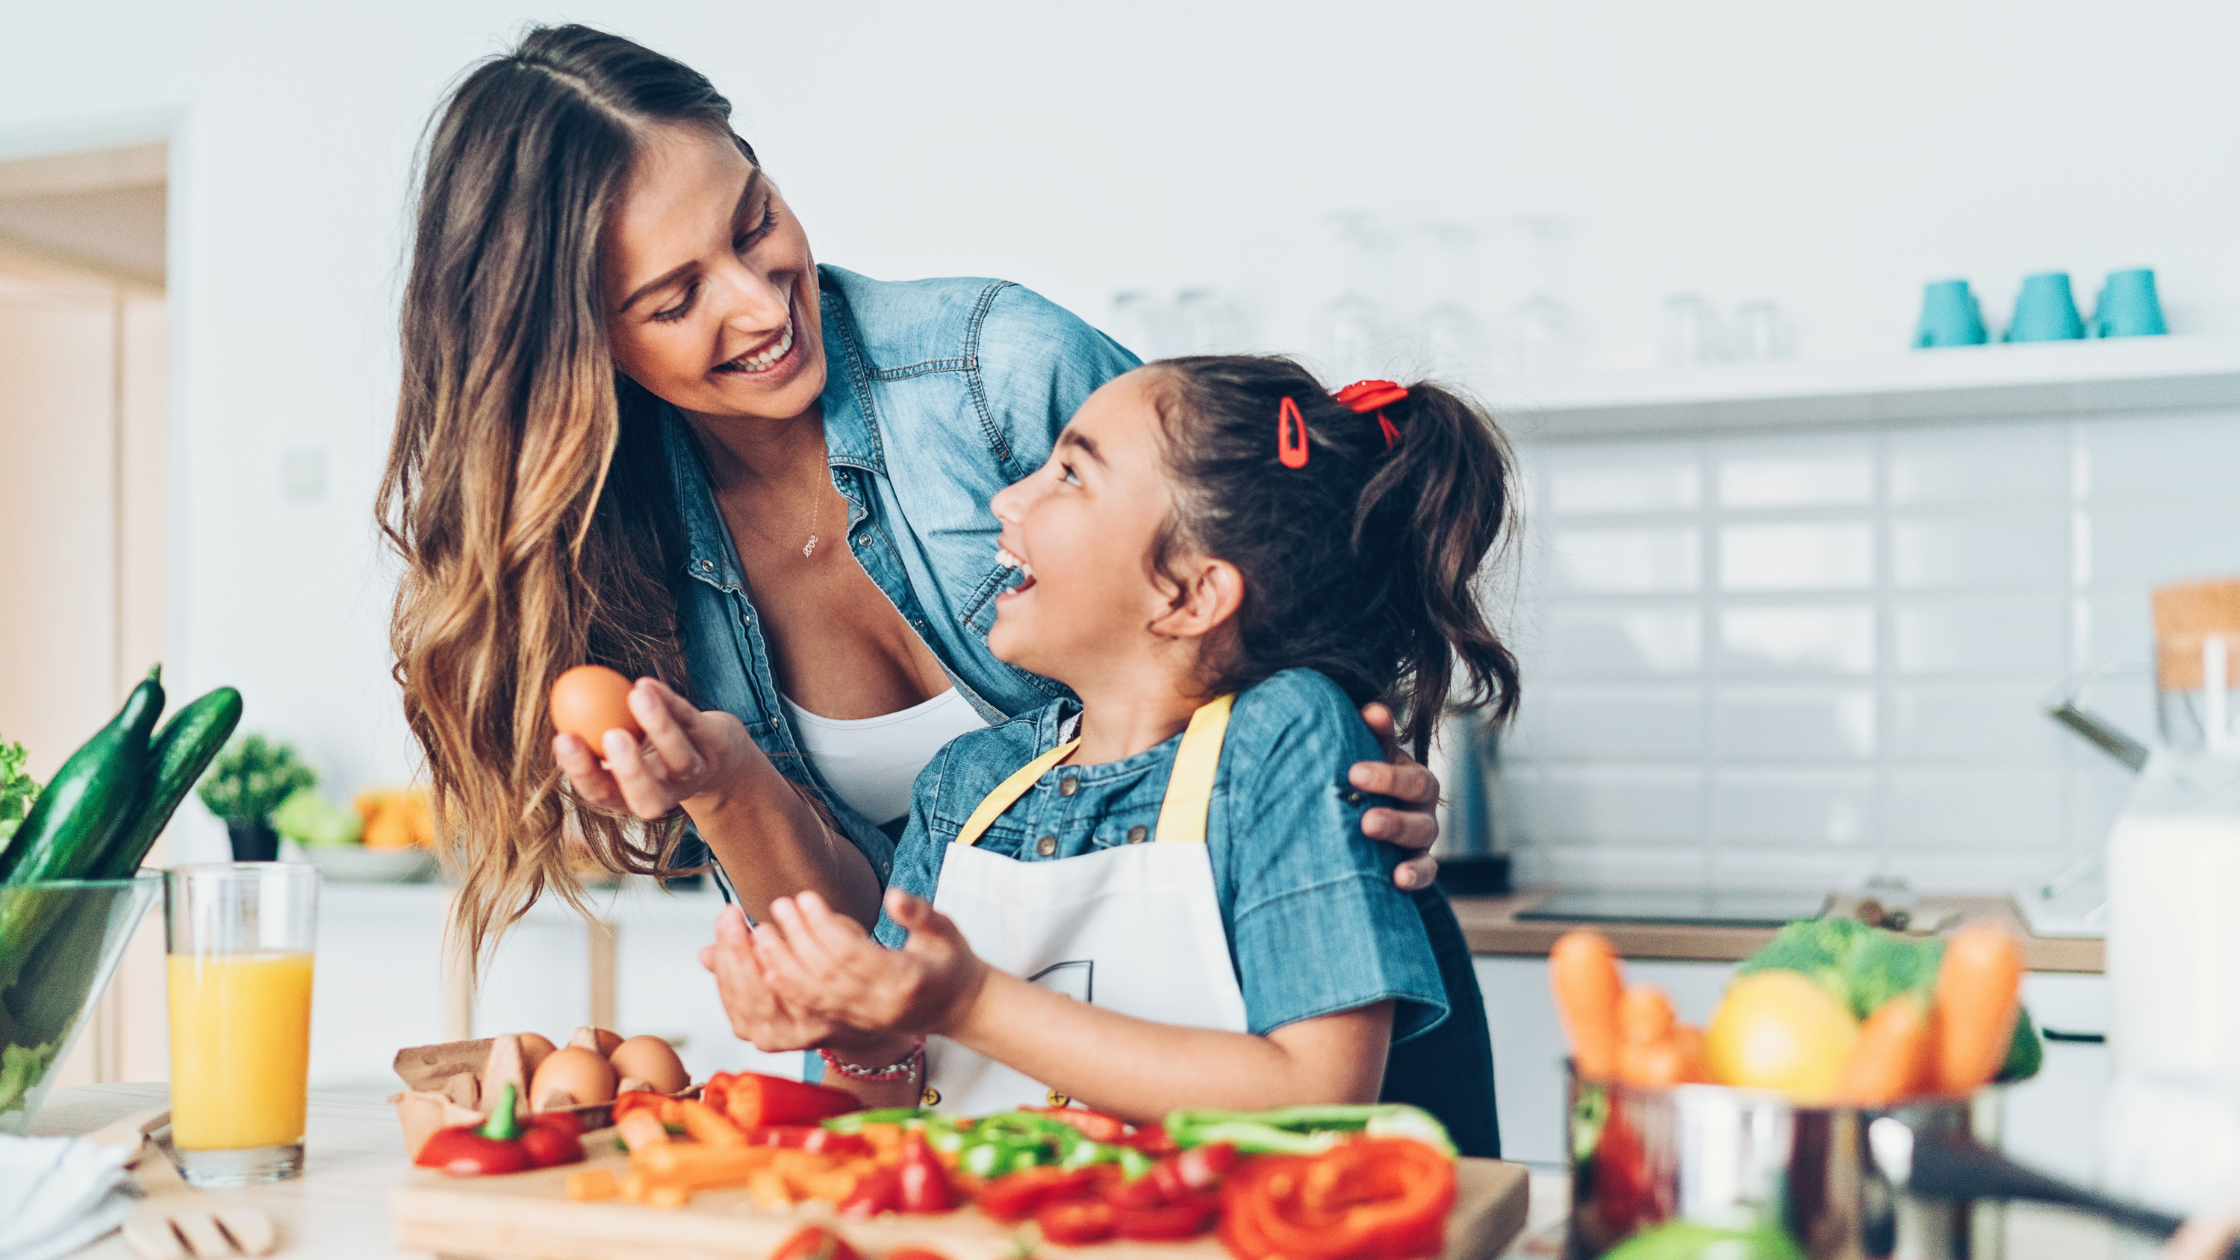 woman and little girl cooking in the kitchen, smiling